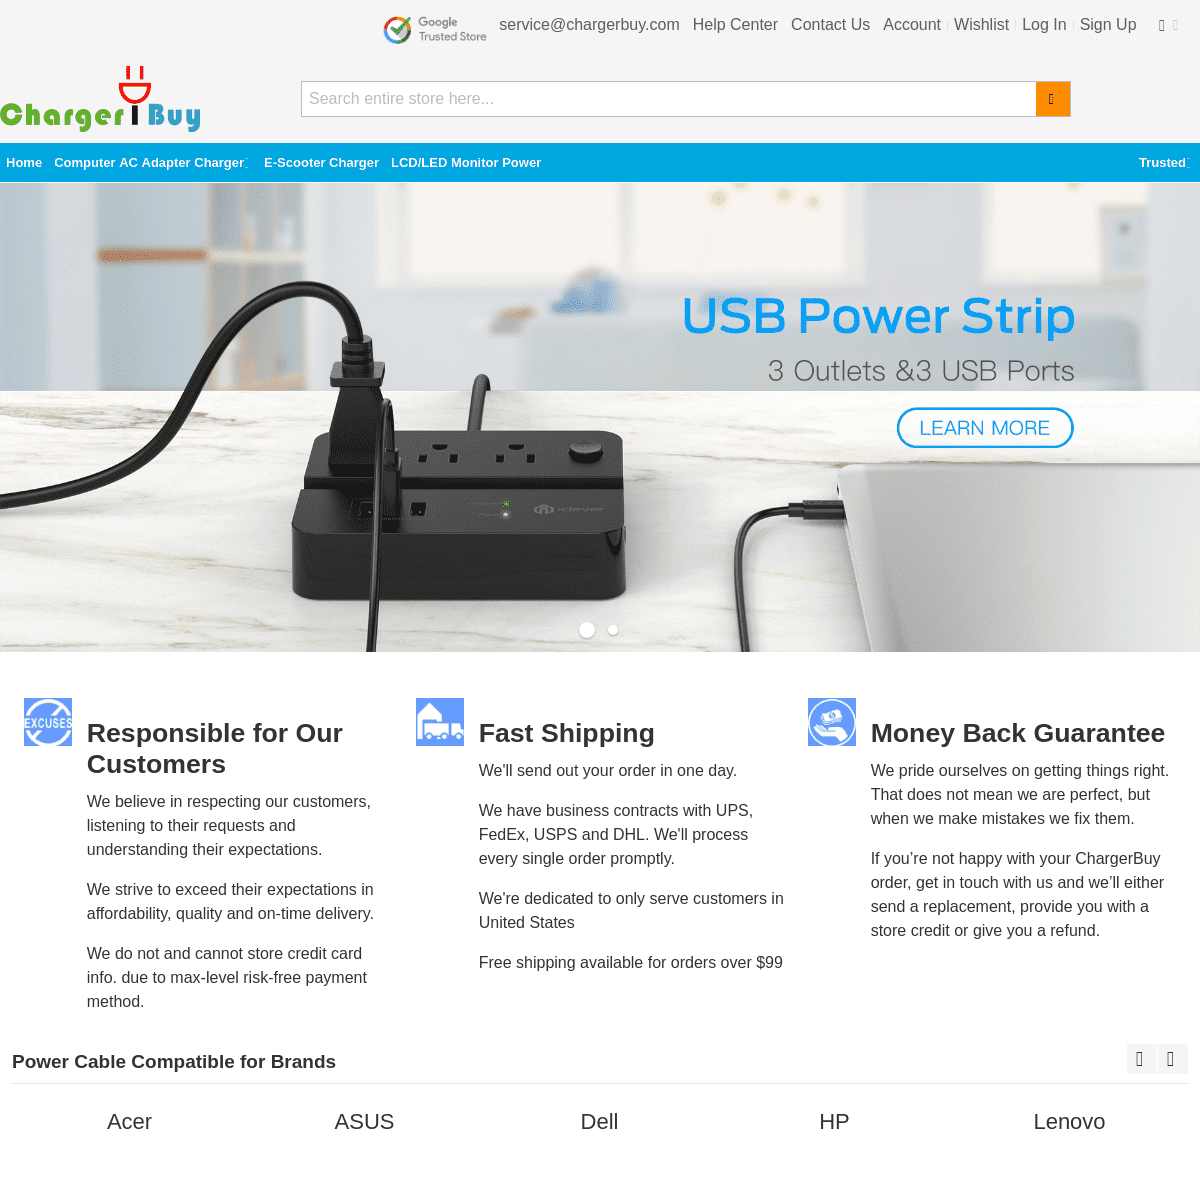 A complete backup of chargerbuy.com